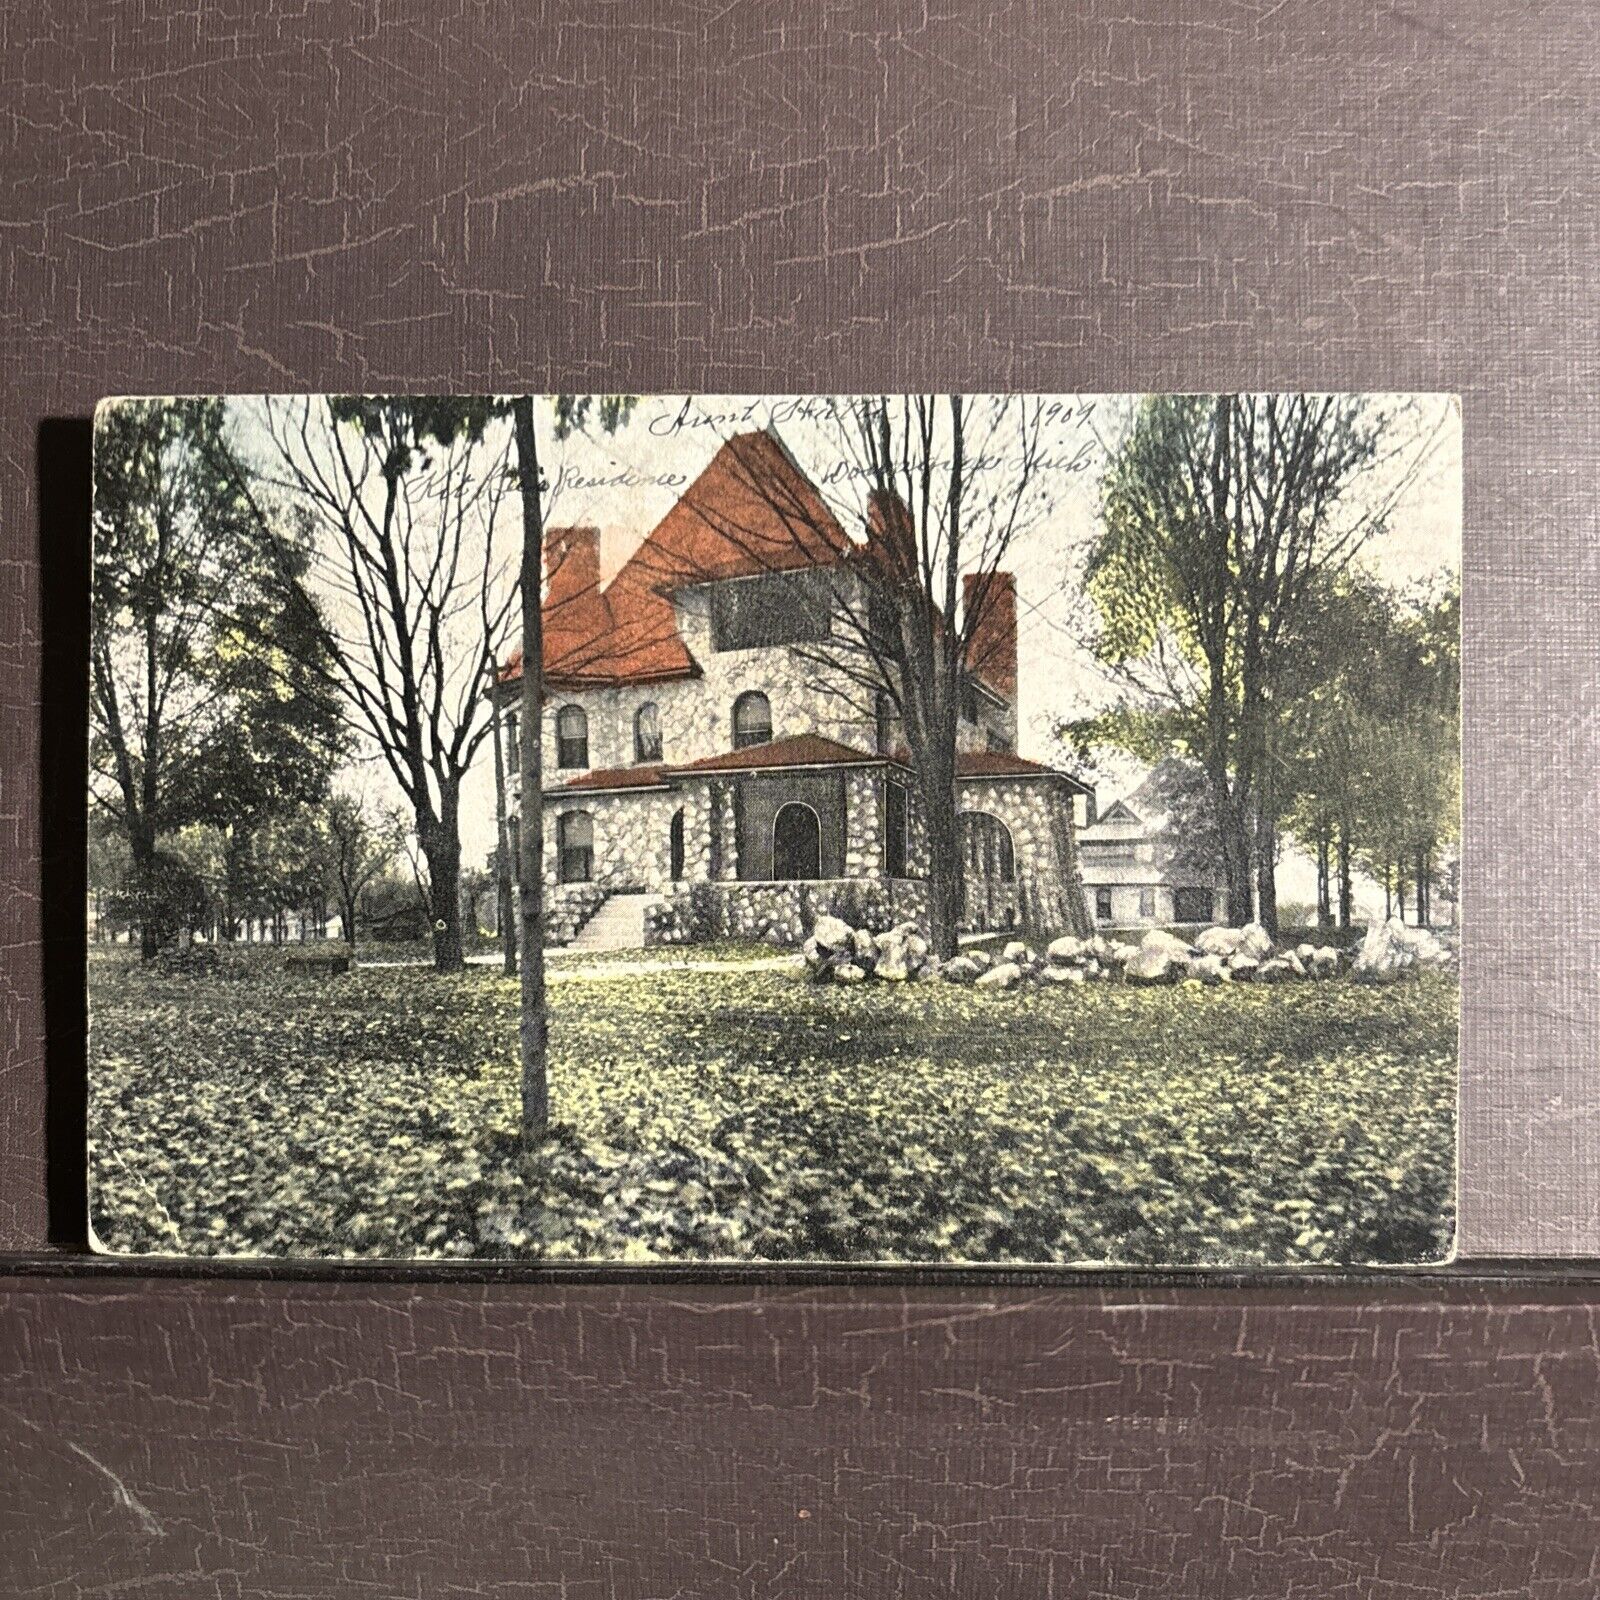 Early view of Lee Stone Castle Mansion Dowagiac Michigan MI Postcard 1909 post